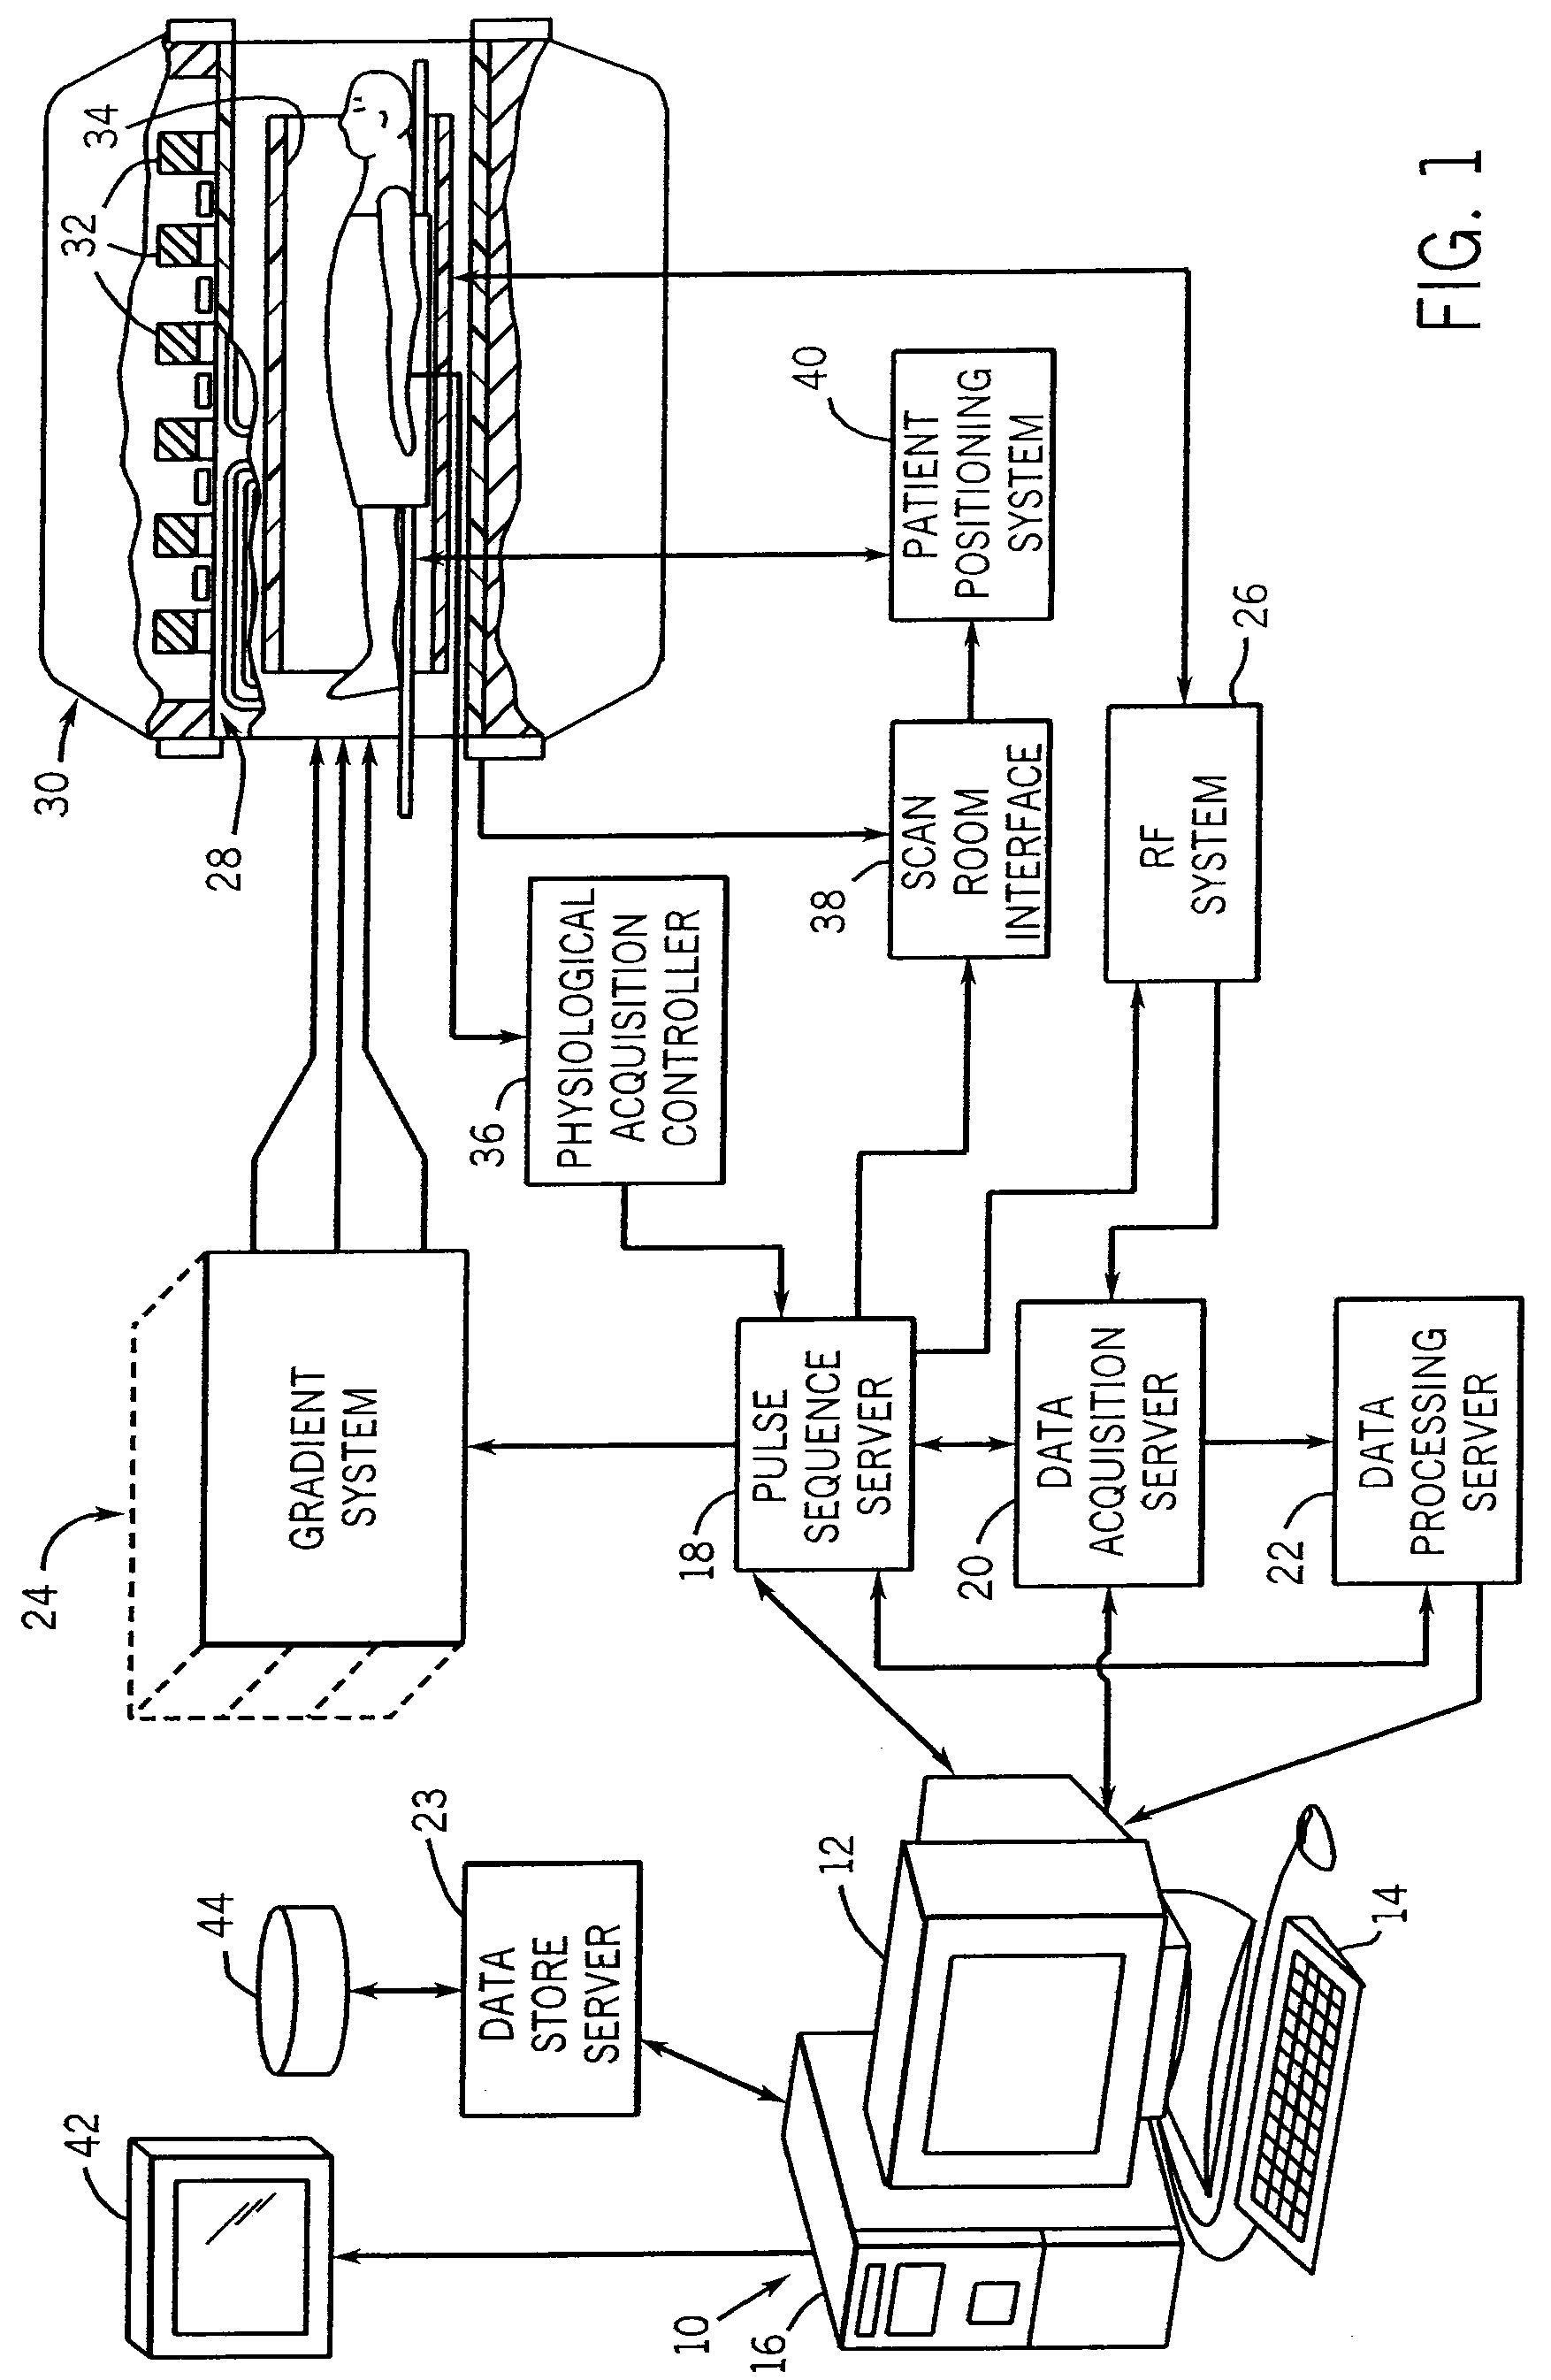 RF coil assembly and method for practicing magnetization transfer on magnetic resonance imaging and spectroscopy systems